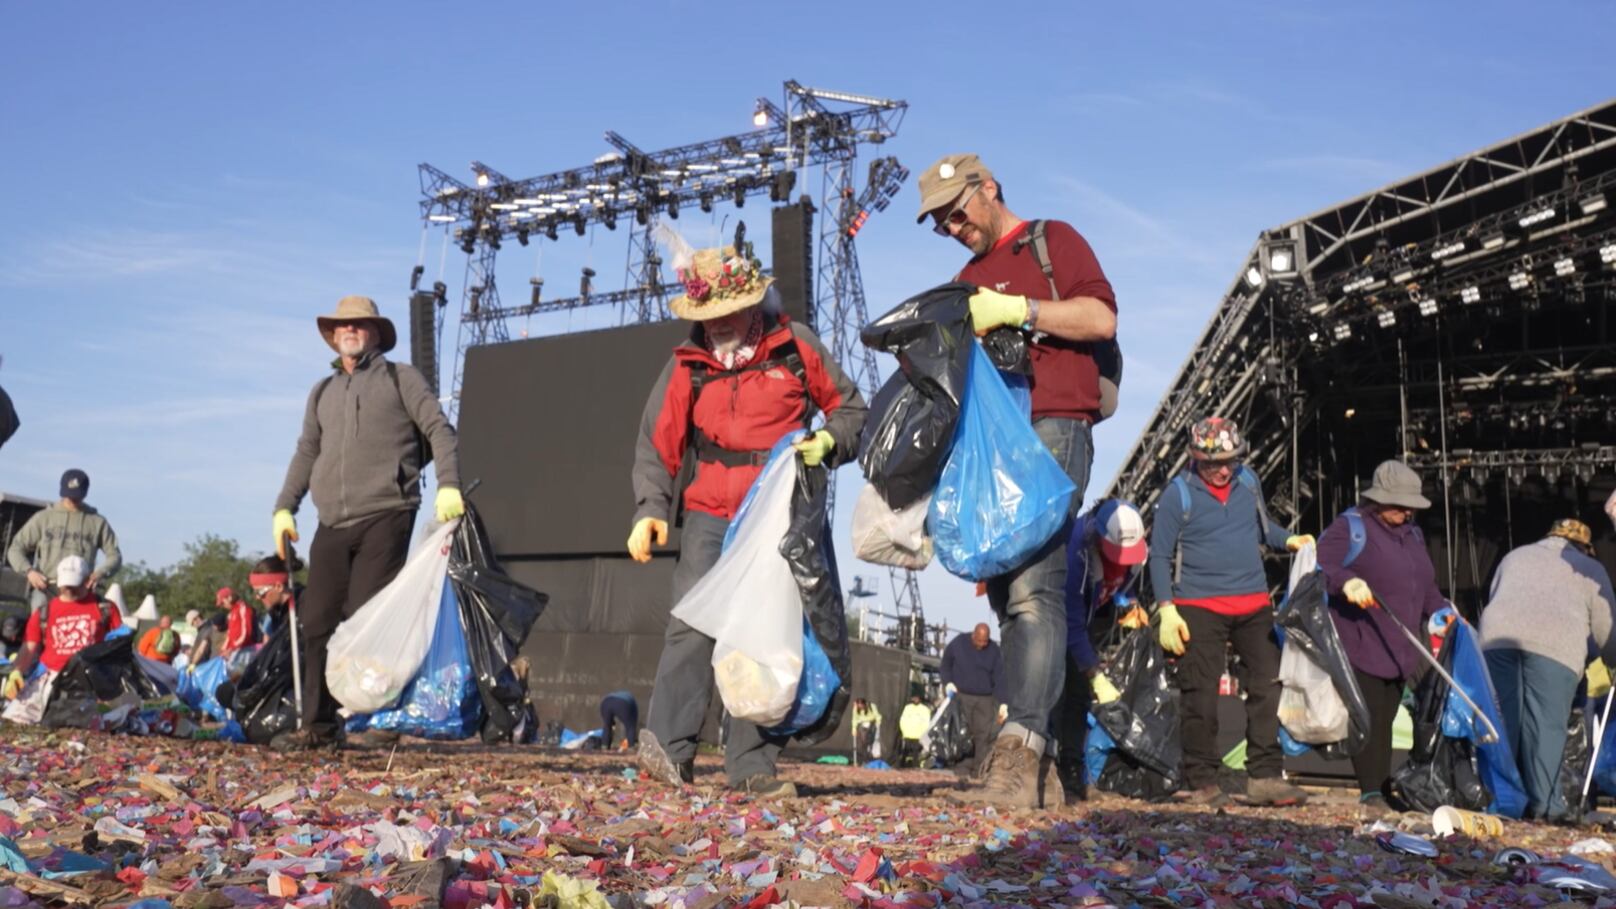 Litter and rubbish being pickup at the end of the Glastonbury Festival at Worthy Farm in Somerset